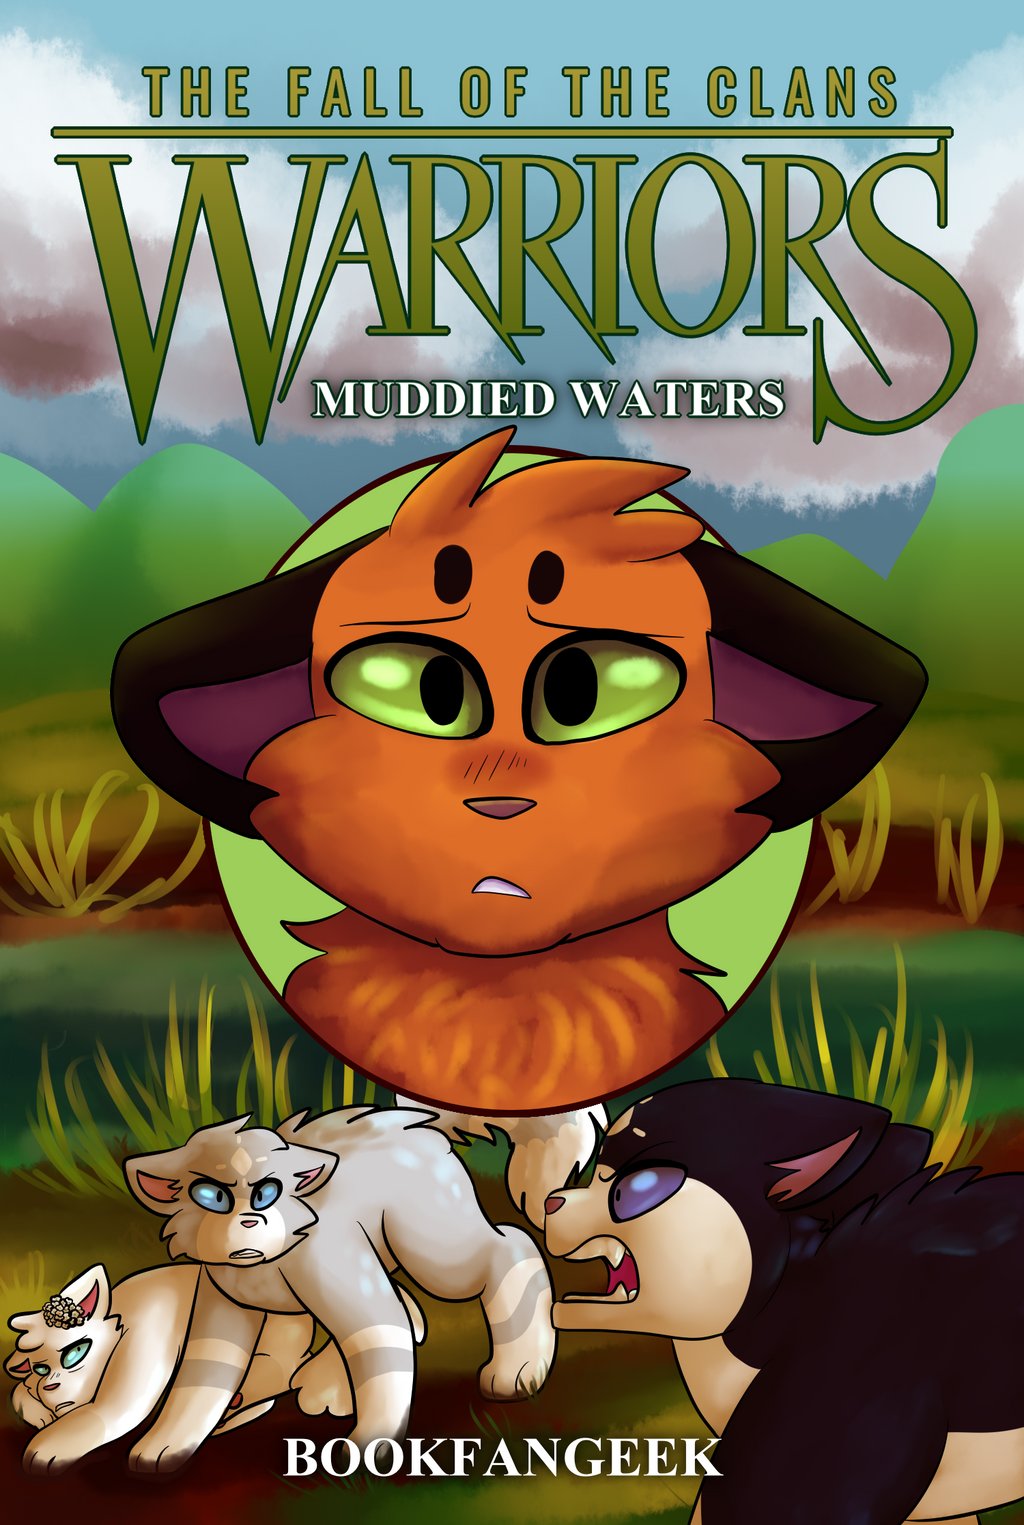 warriors__the_fall_of_the_clans__muddied_waters_by_bookfangeek-dclz7du.png